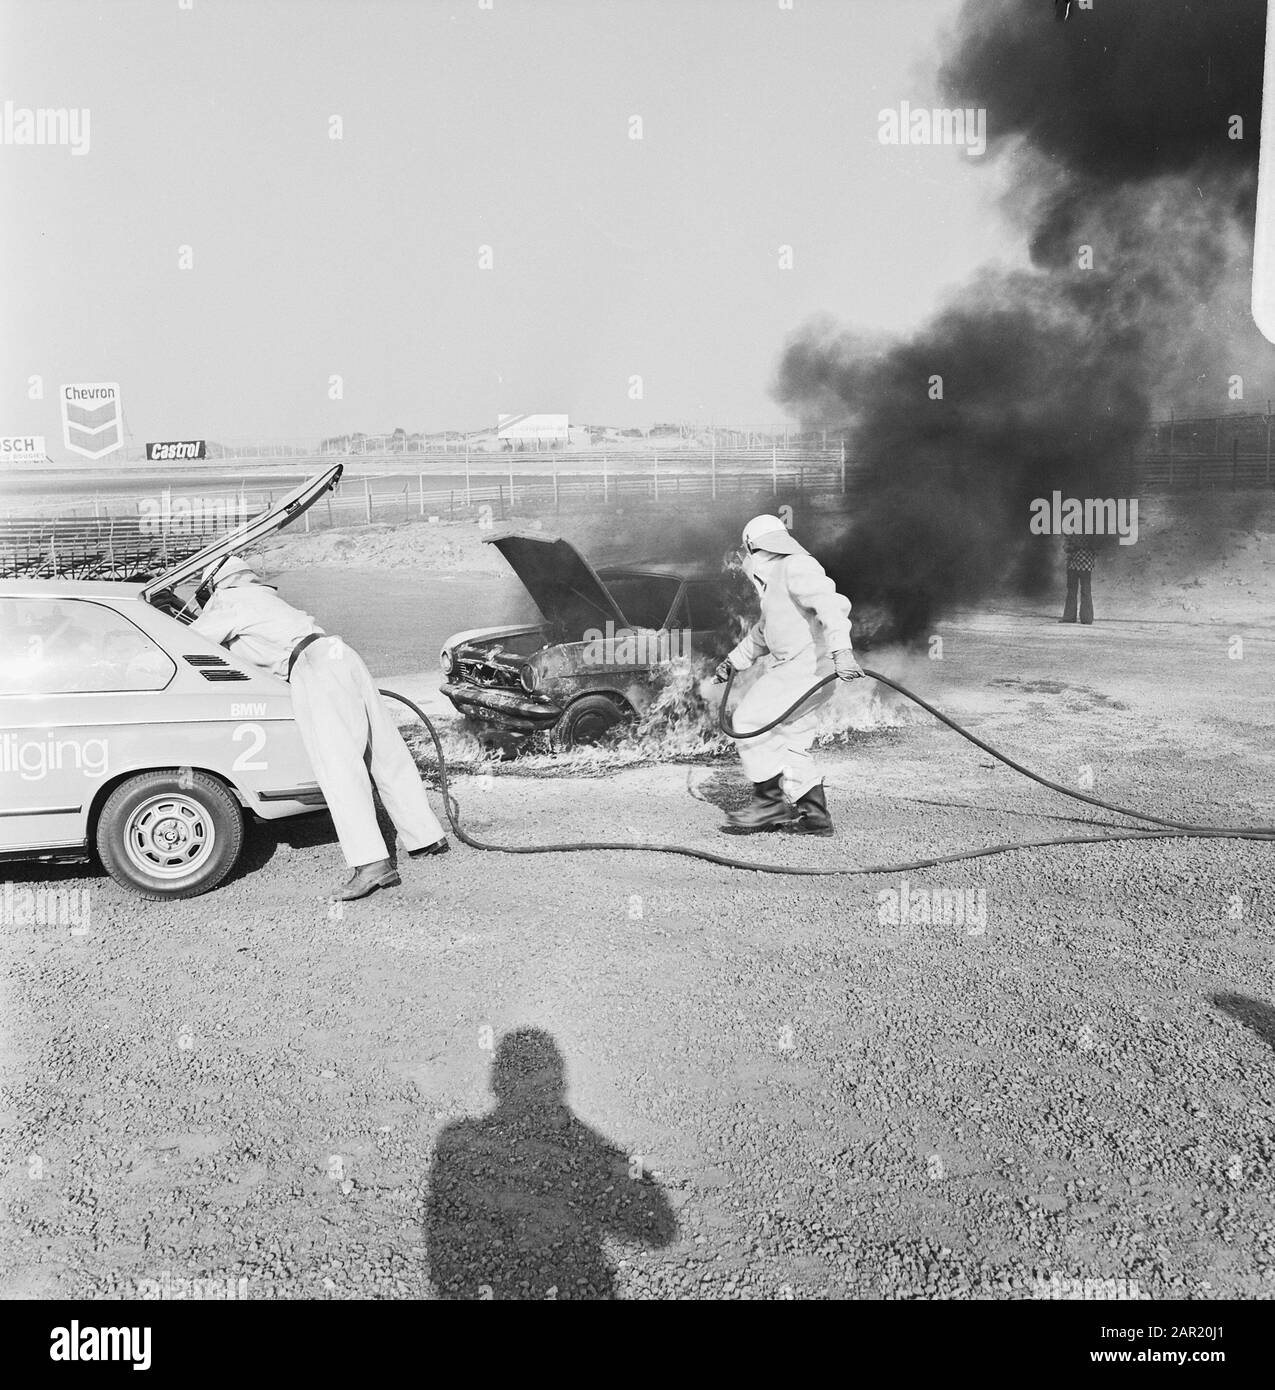 Rescue demonstration at Zandvoort circuit, volunteers with equipped BMW extinguishing fires wreck Date: 9 april 1974 Location: Noord-Holland, Zandvoort Keywords: VOLUNTERS, demonstrations Stock Photo